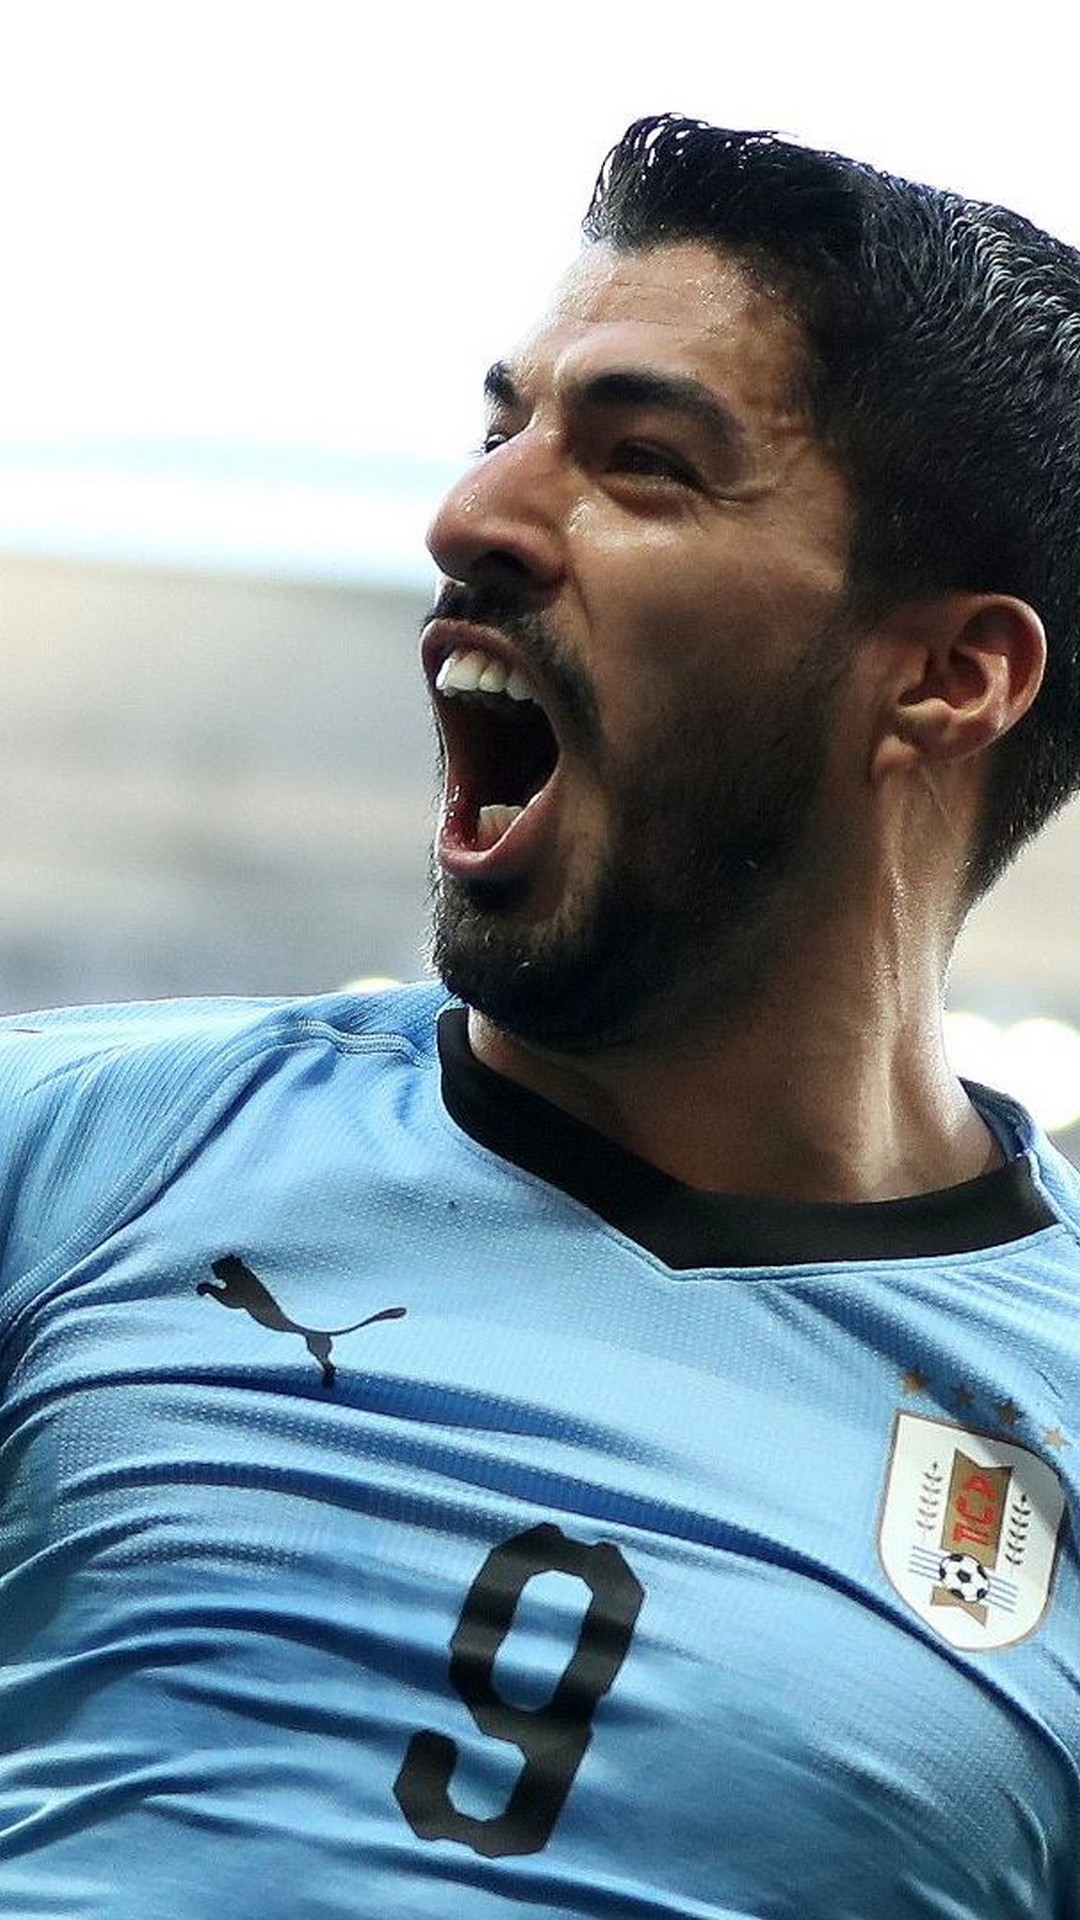 Luis Suarez Uruguay Wallpaper iPhone with image resolution 1080x1920 pixel. You can make this wallpaper for your iPhone 5, 6, 7, 8, X backgrounds, Mobile Screensaver, or iPad Lock Screen